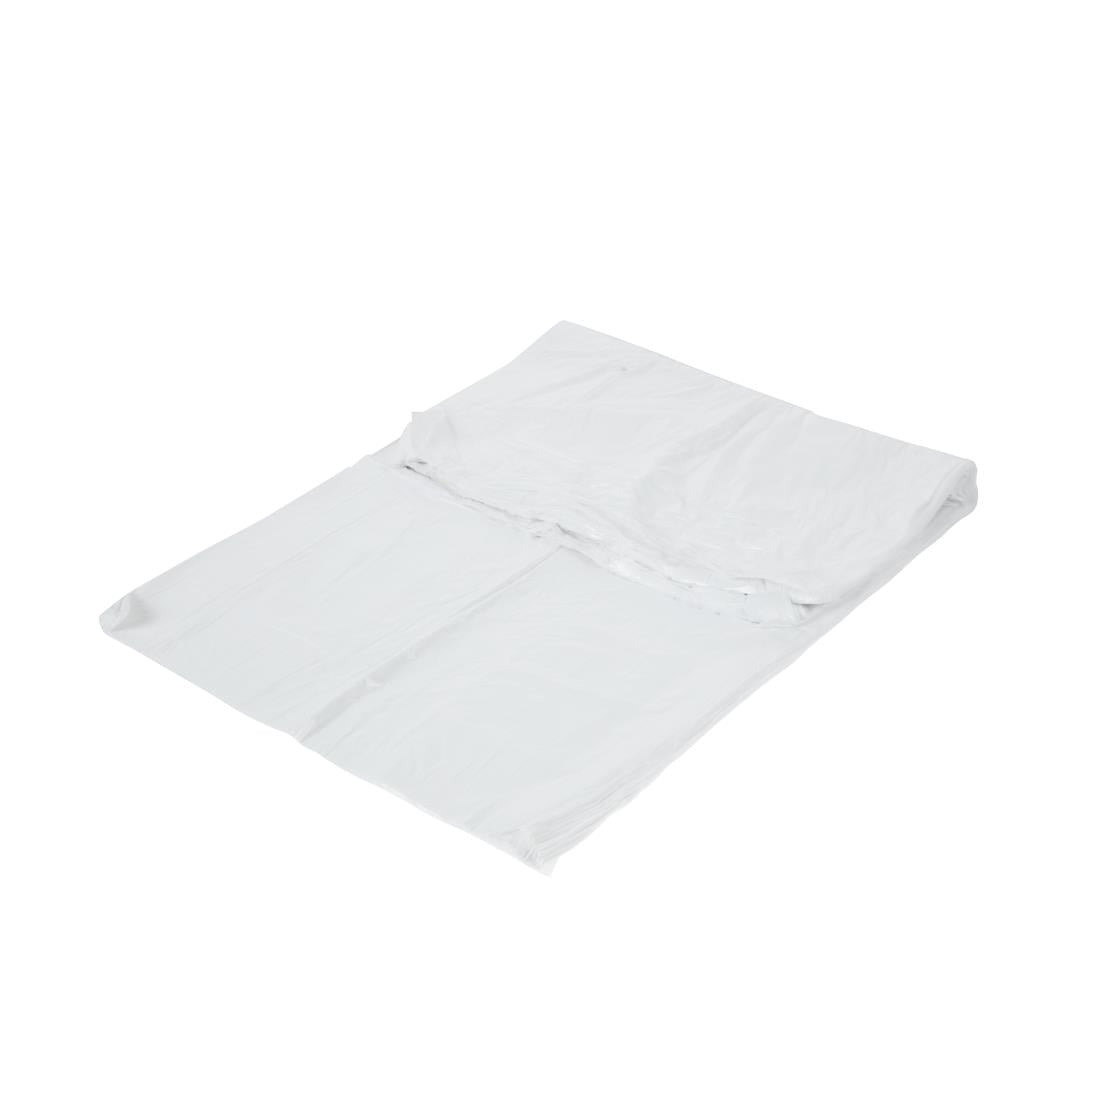 Jantex Small White Swing Bin Liners 50Ltr (Pack of 1000) JD Catering Equipment Solutions Ltd